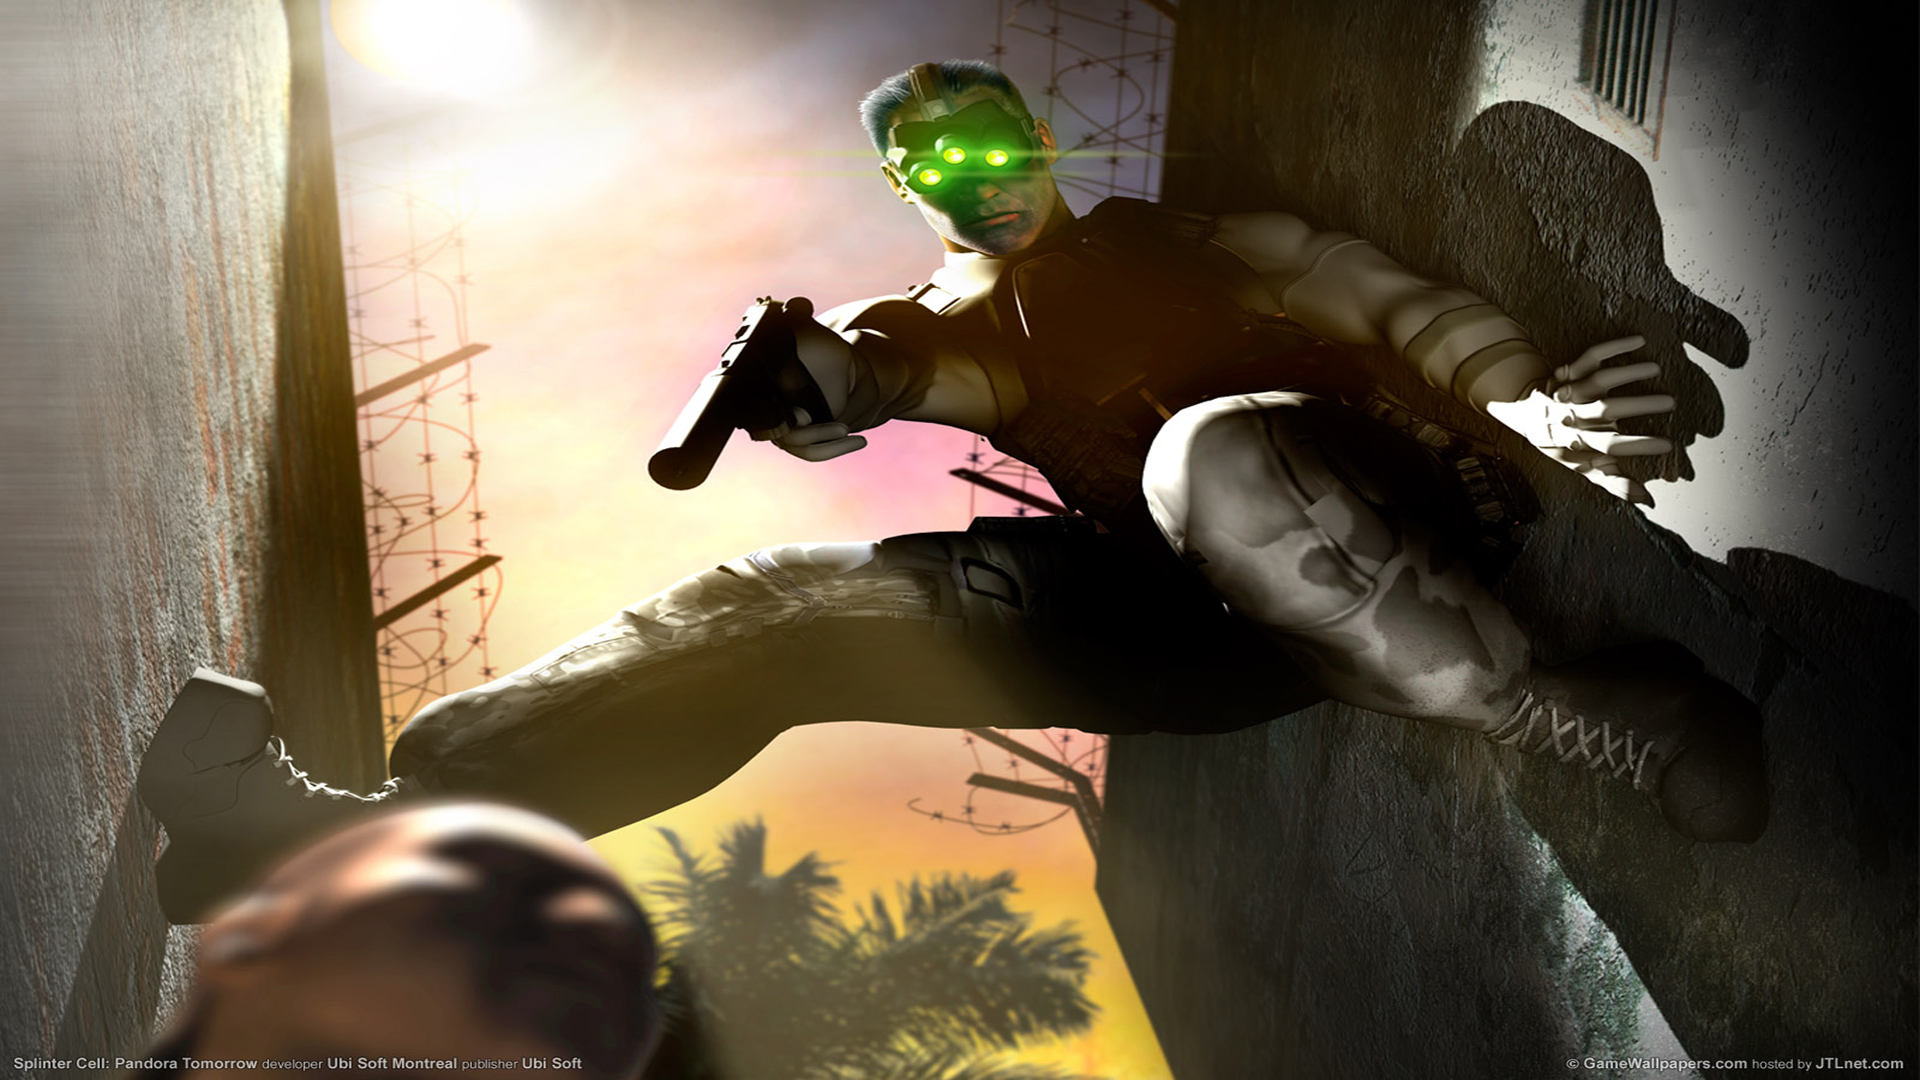 TGDB - Browse - Game - Tom Clancy's Splinter Cell: Double Agent